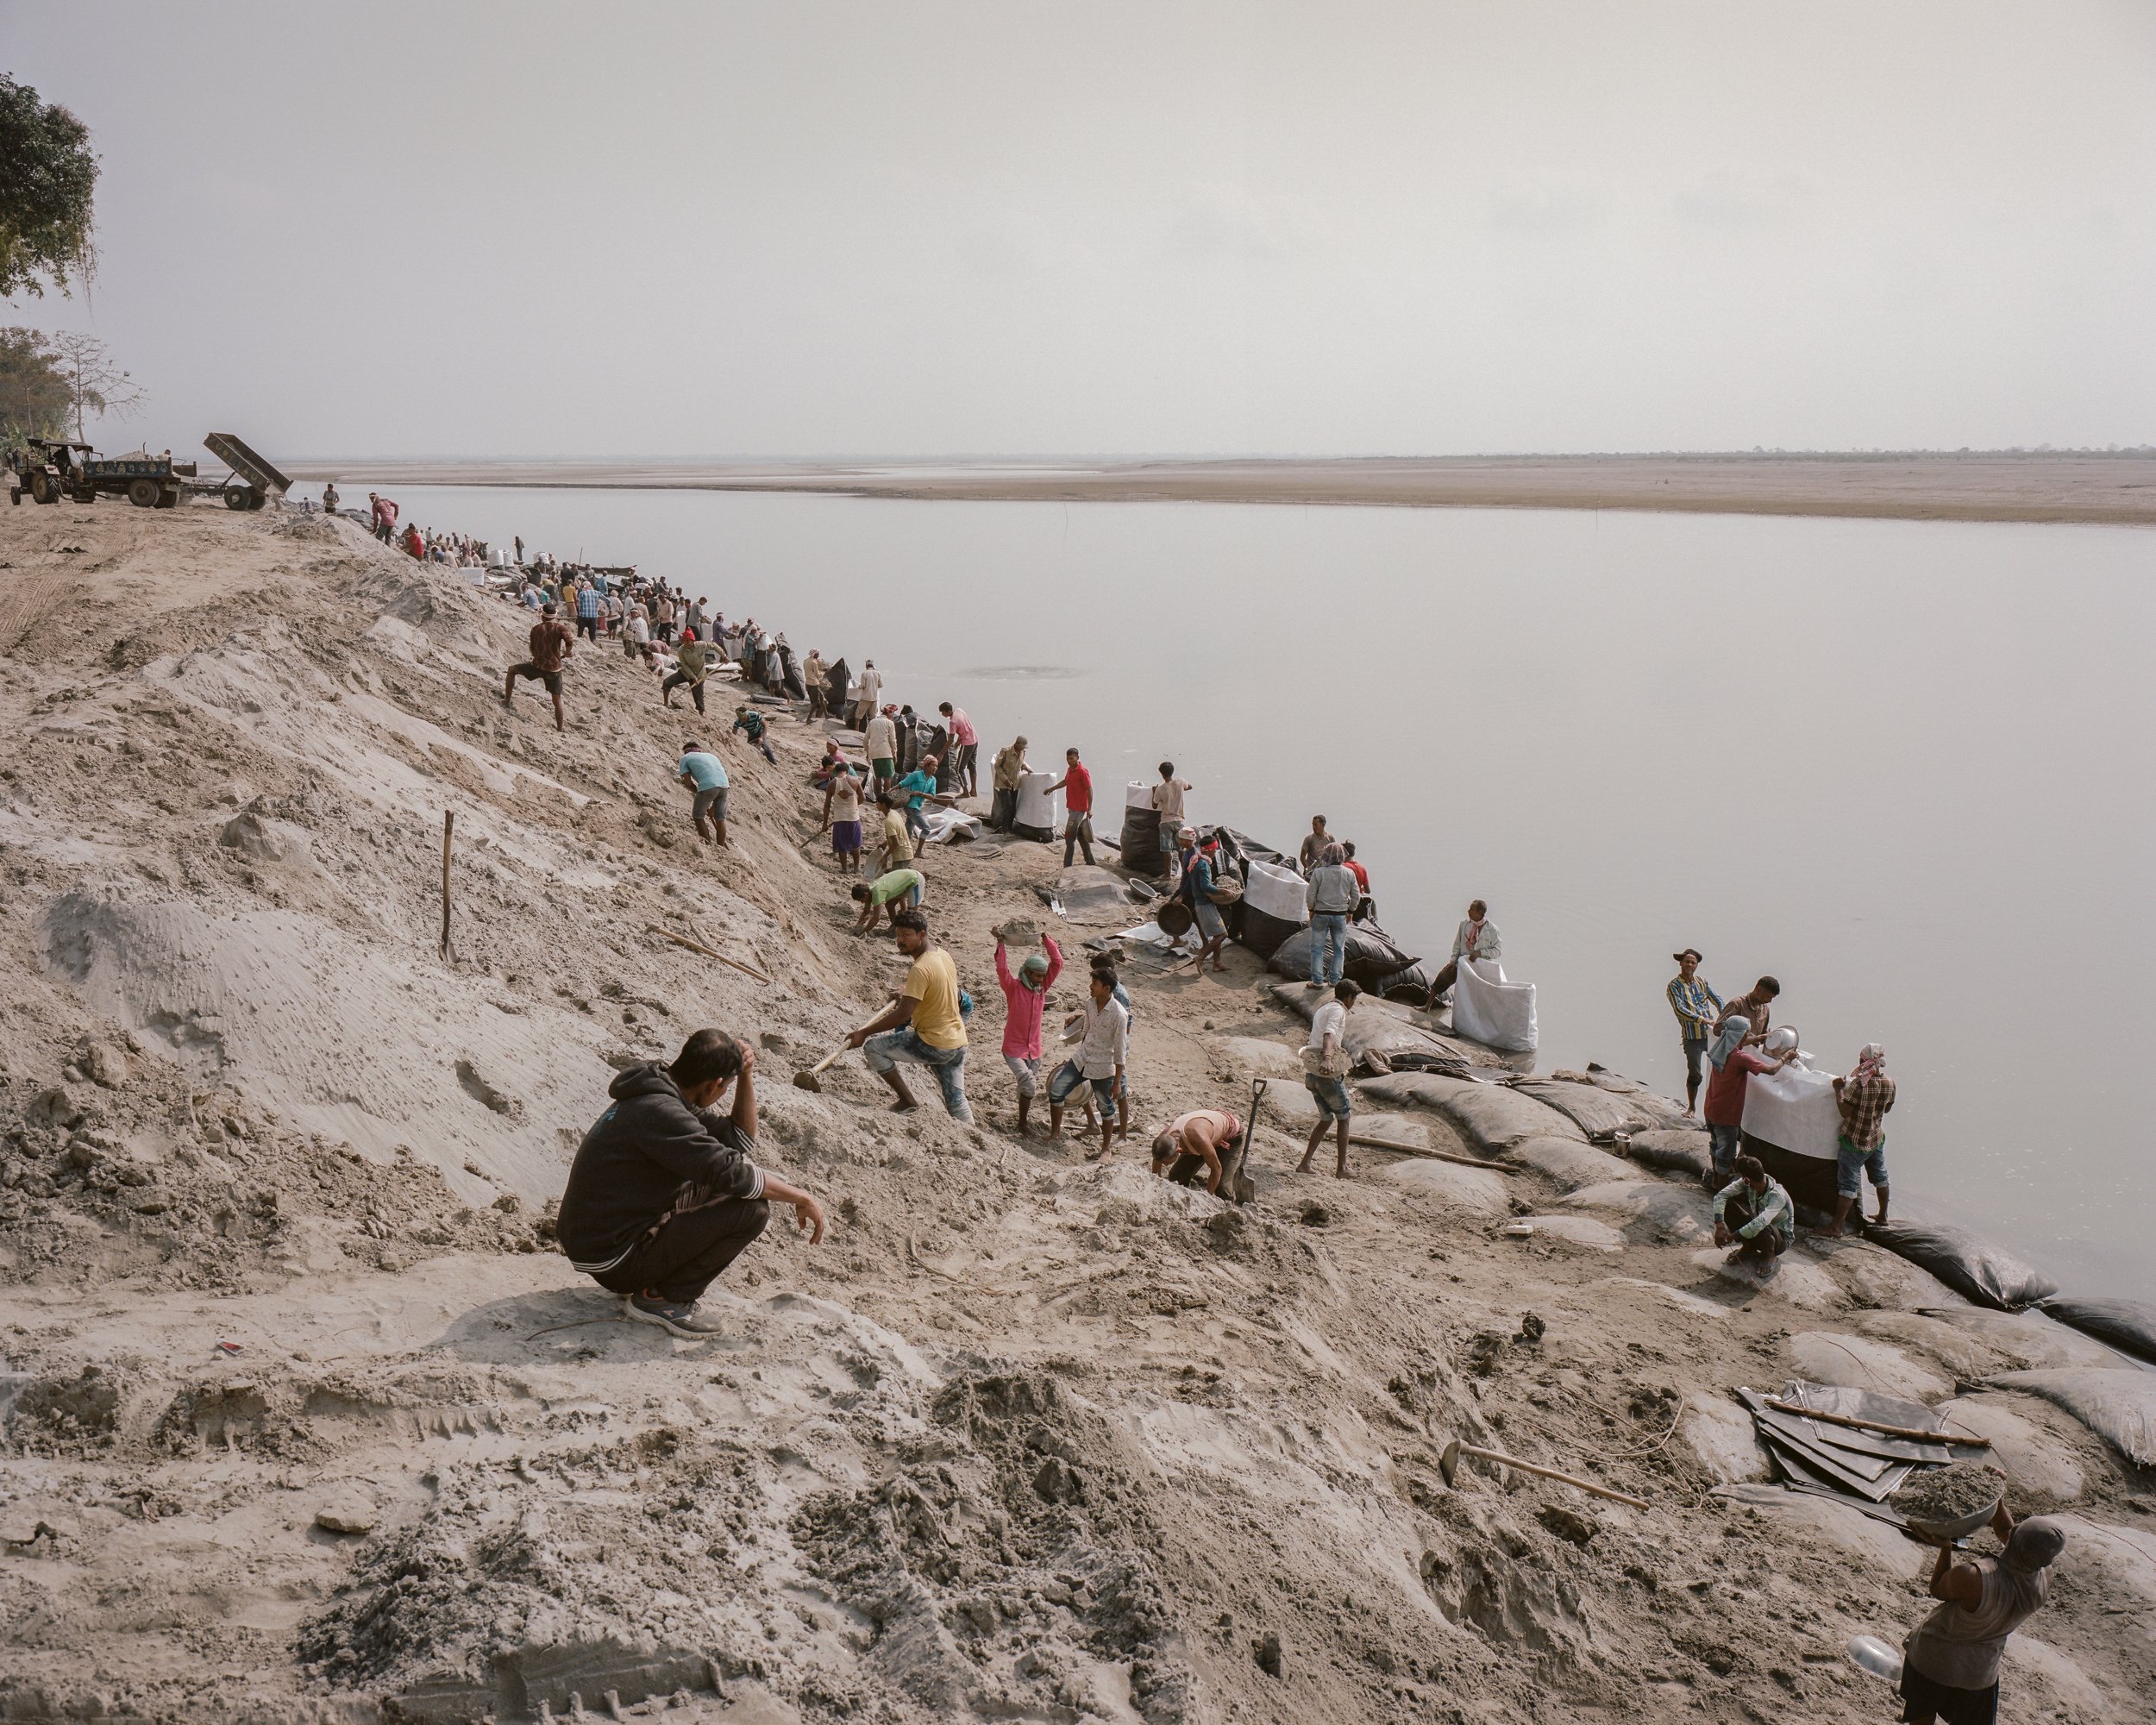   Villagers collect sand from the riverbed of Brahmaputra, and transport to endangered part of the riverside in order to build sandbag embankments.    Kumar Gaon, Majuli, India — 2020  